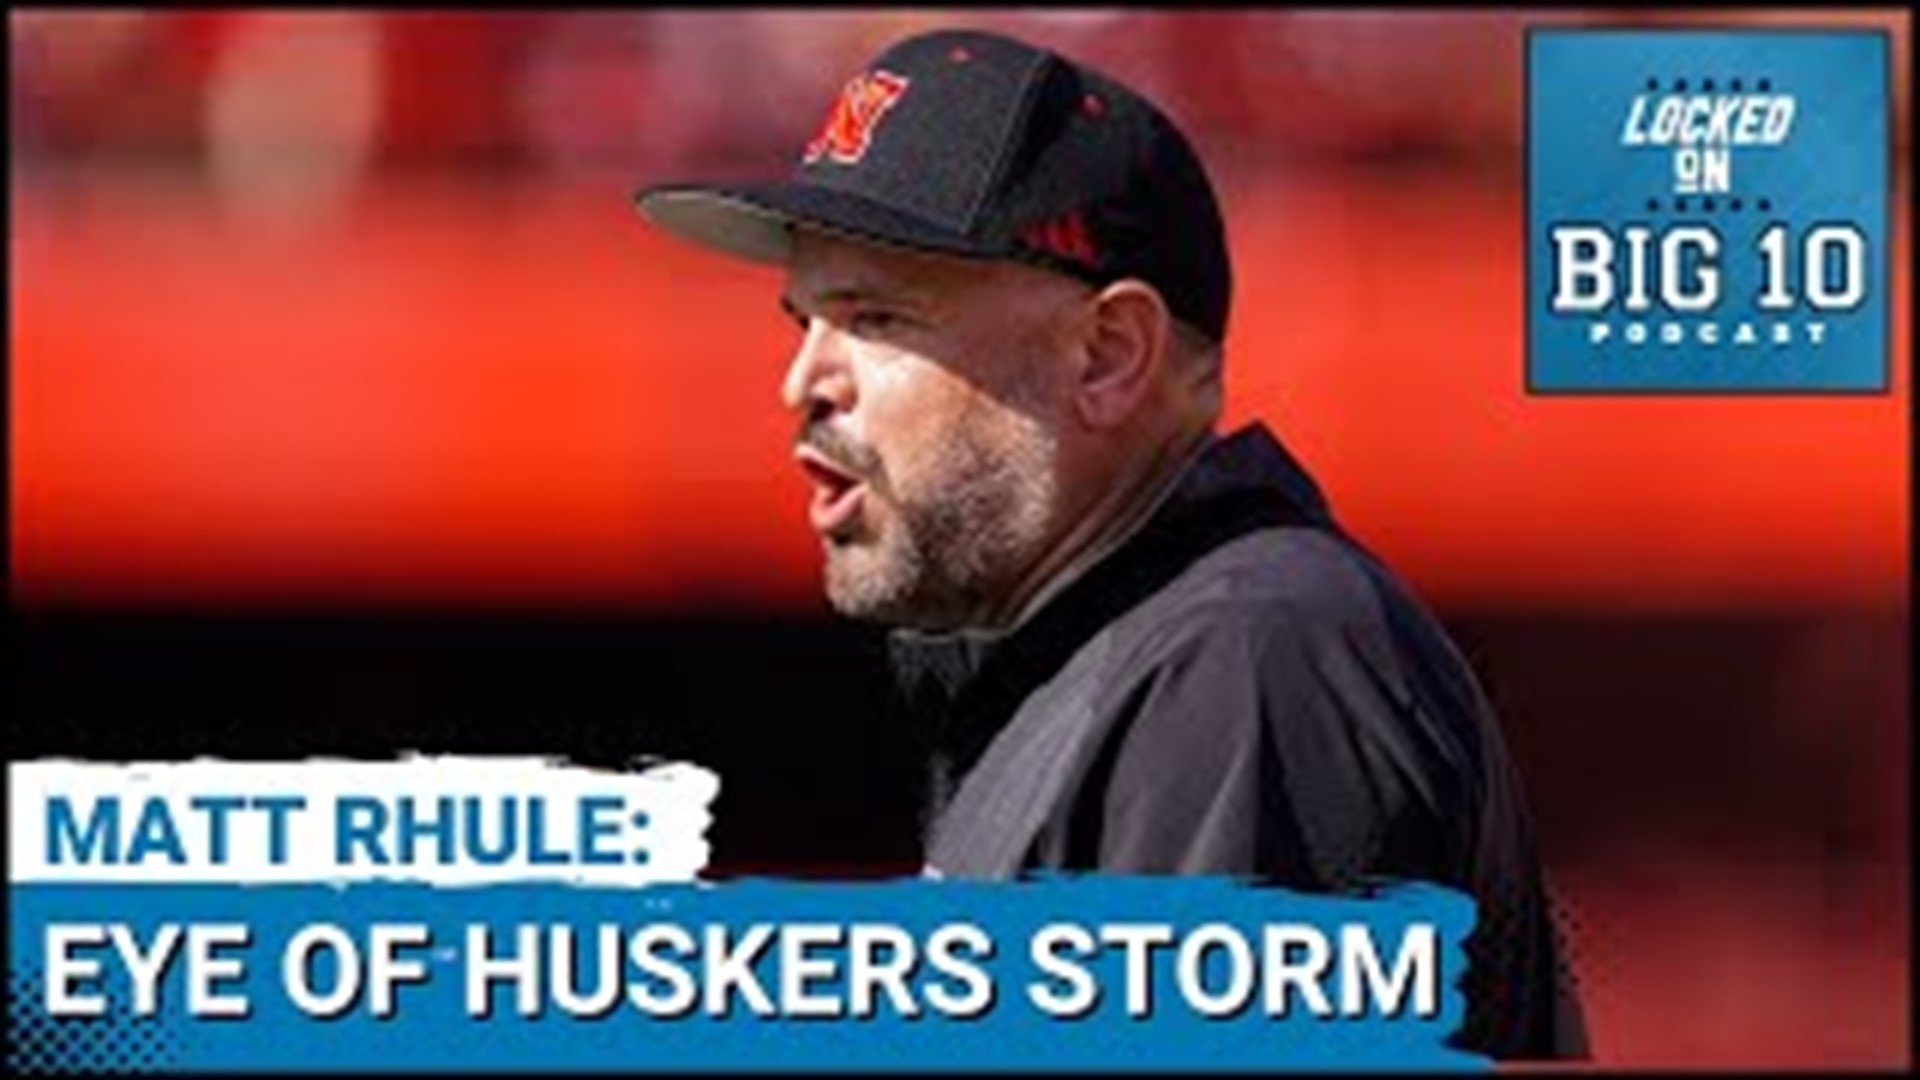 While March Madness and the NCAA Tournament begins for men's and women's basketball, Nebraska football coach Matt Rhule finds himself in the middle of a storm.